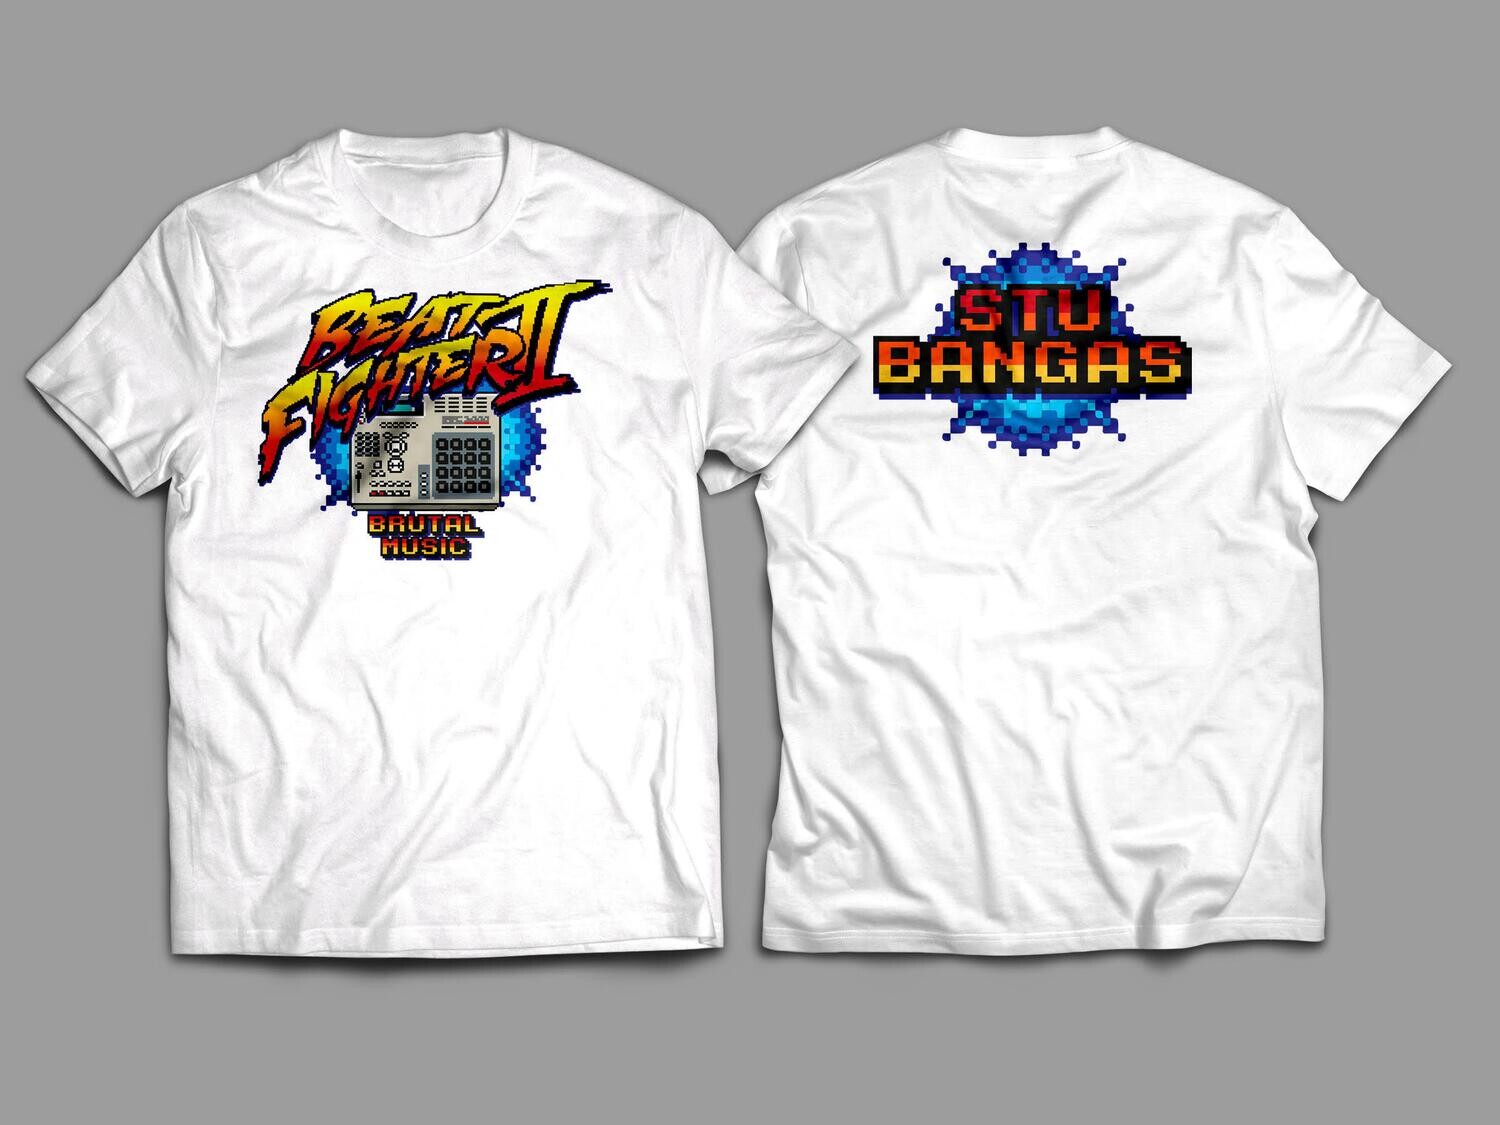 Stu Bangas “Beat Fighter 2" Shirts (20 IN TOTAL AVAILABLE)